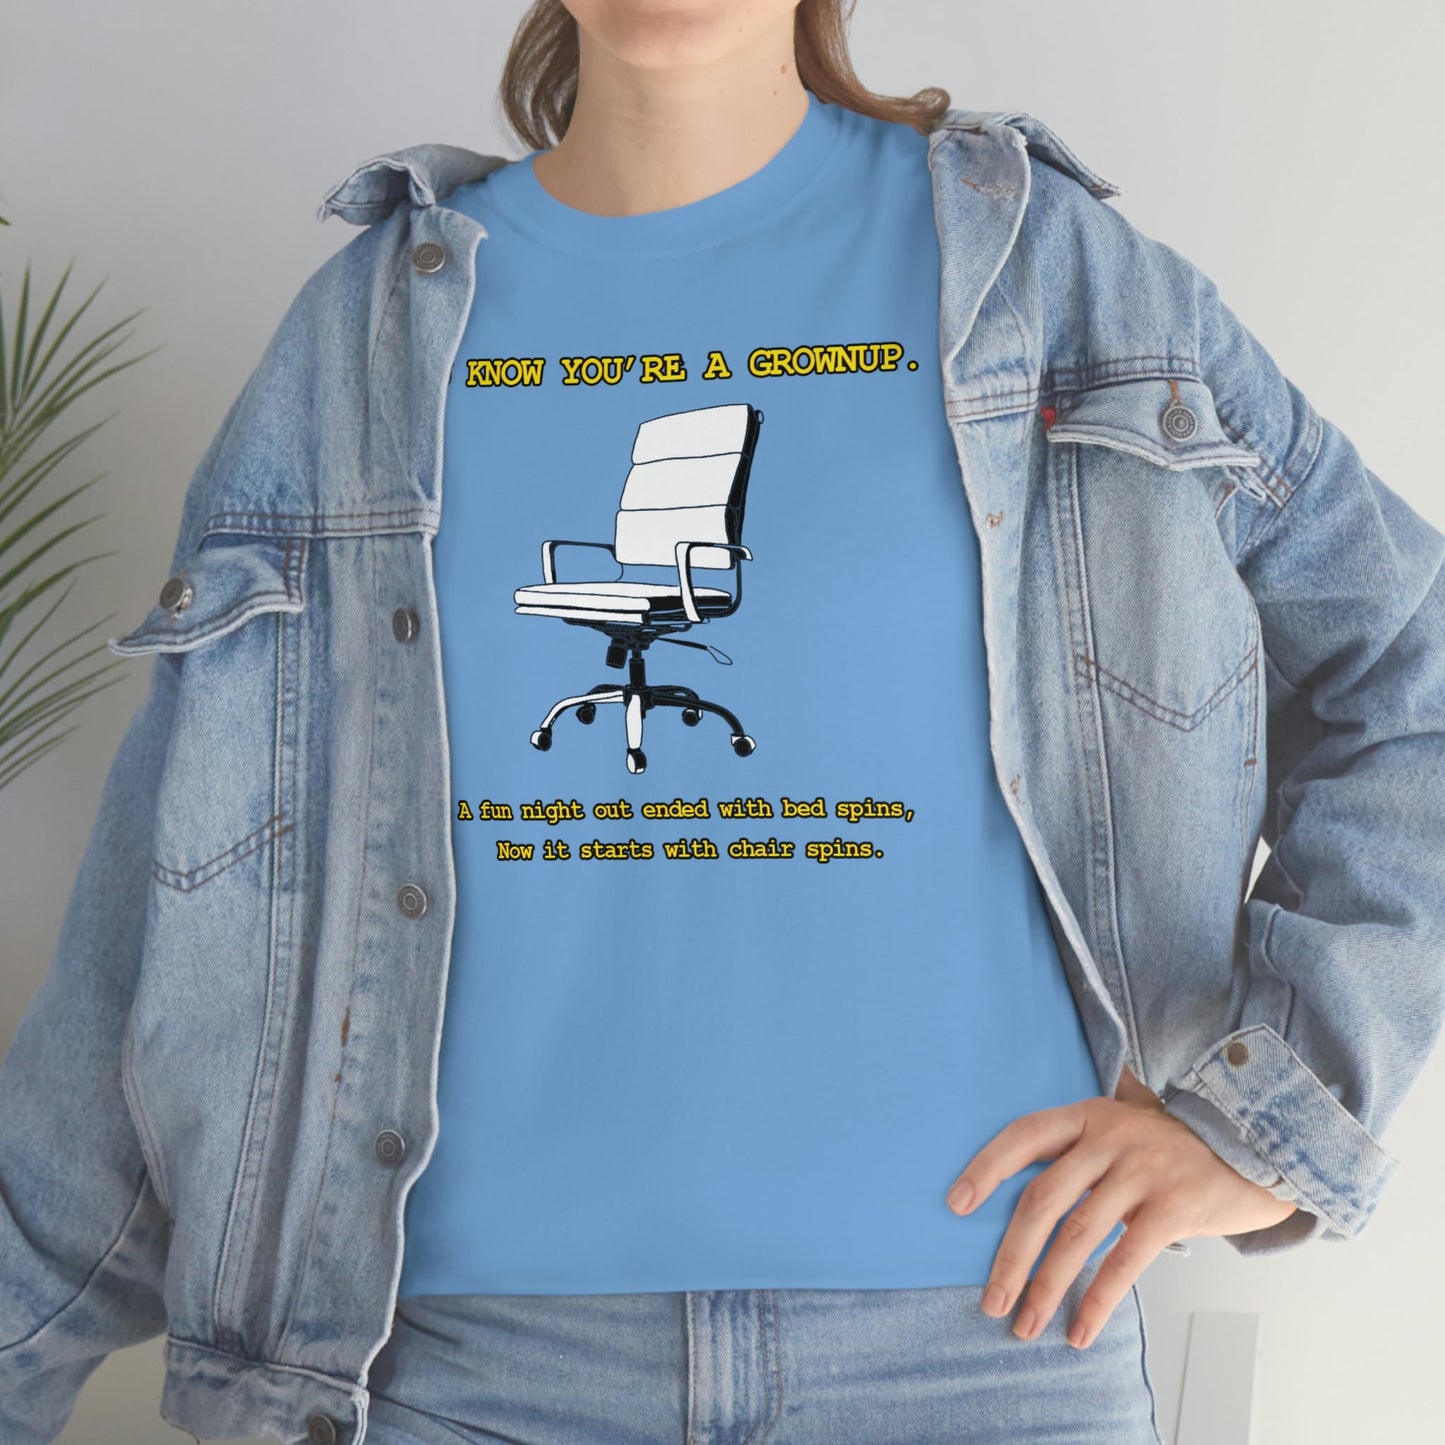 You Know You're A Grownup Unisex Heavy Cotton Tee Bedspins Office Humor Work Prank Bed Spins Joke fun funny Present Gift